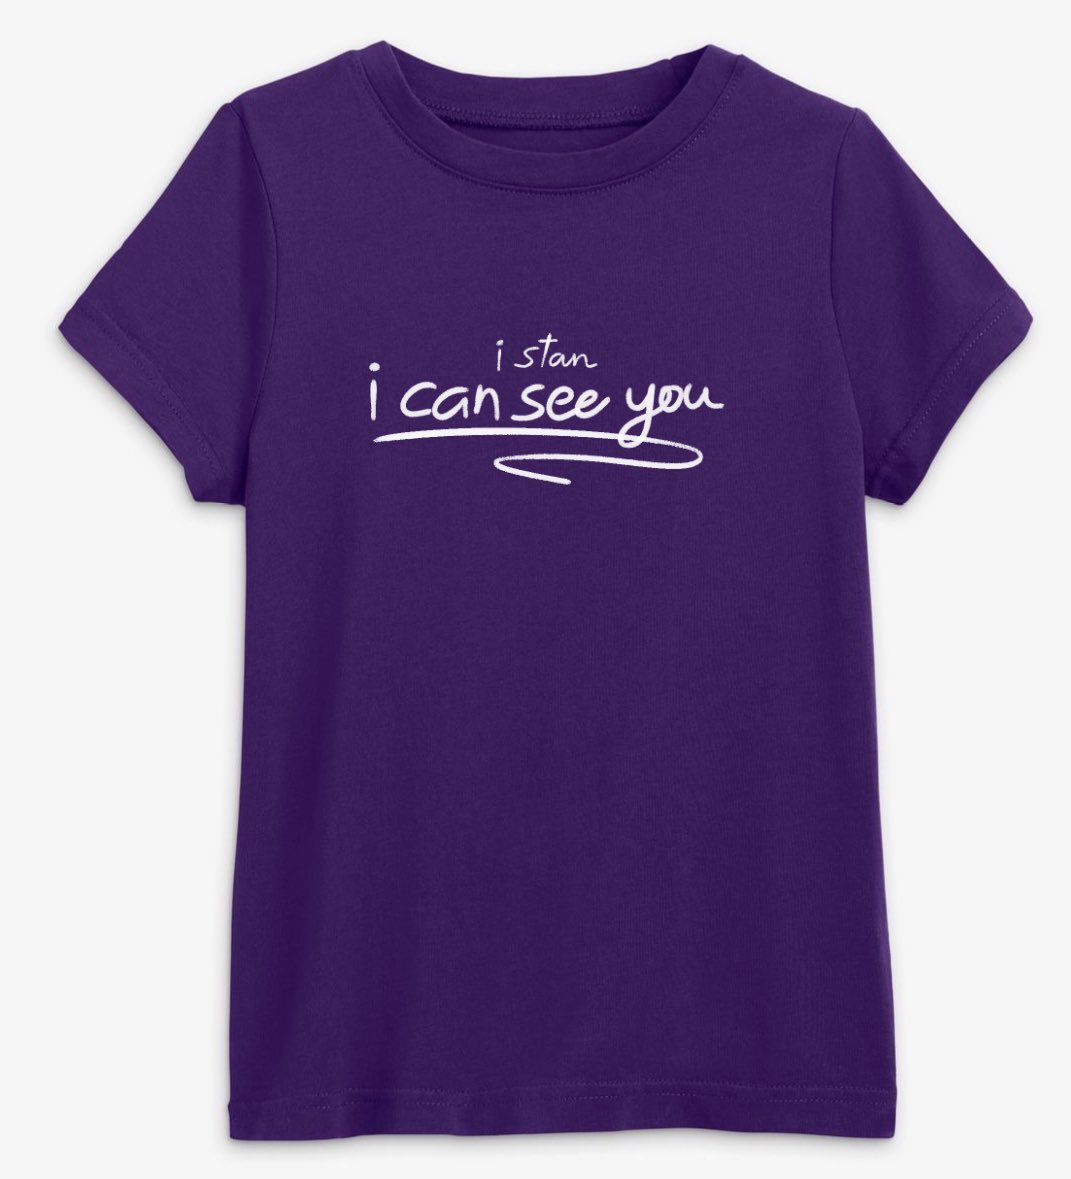 claim your “i stanned i can see you before sntv” shirts now!